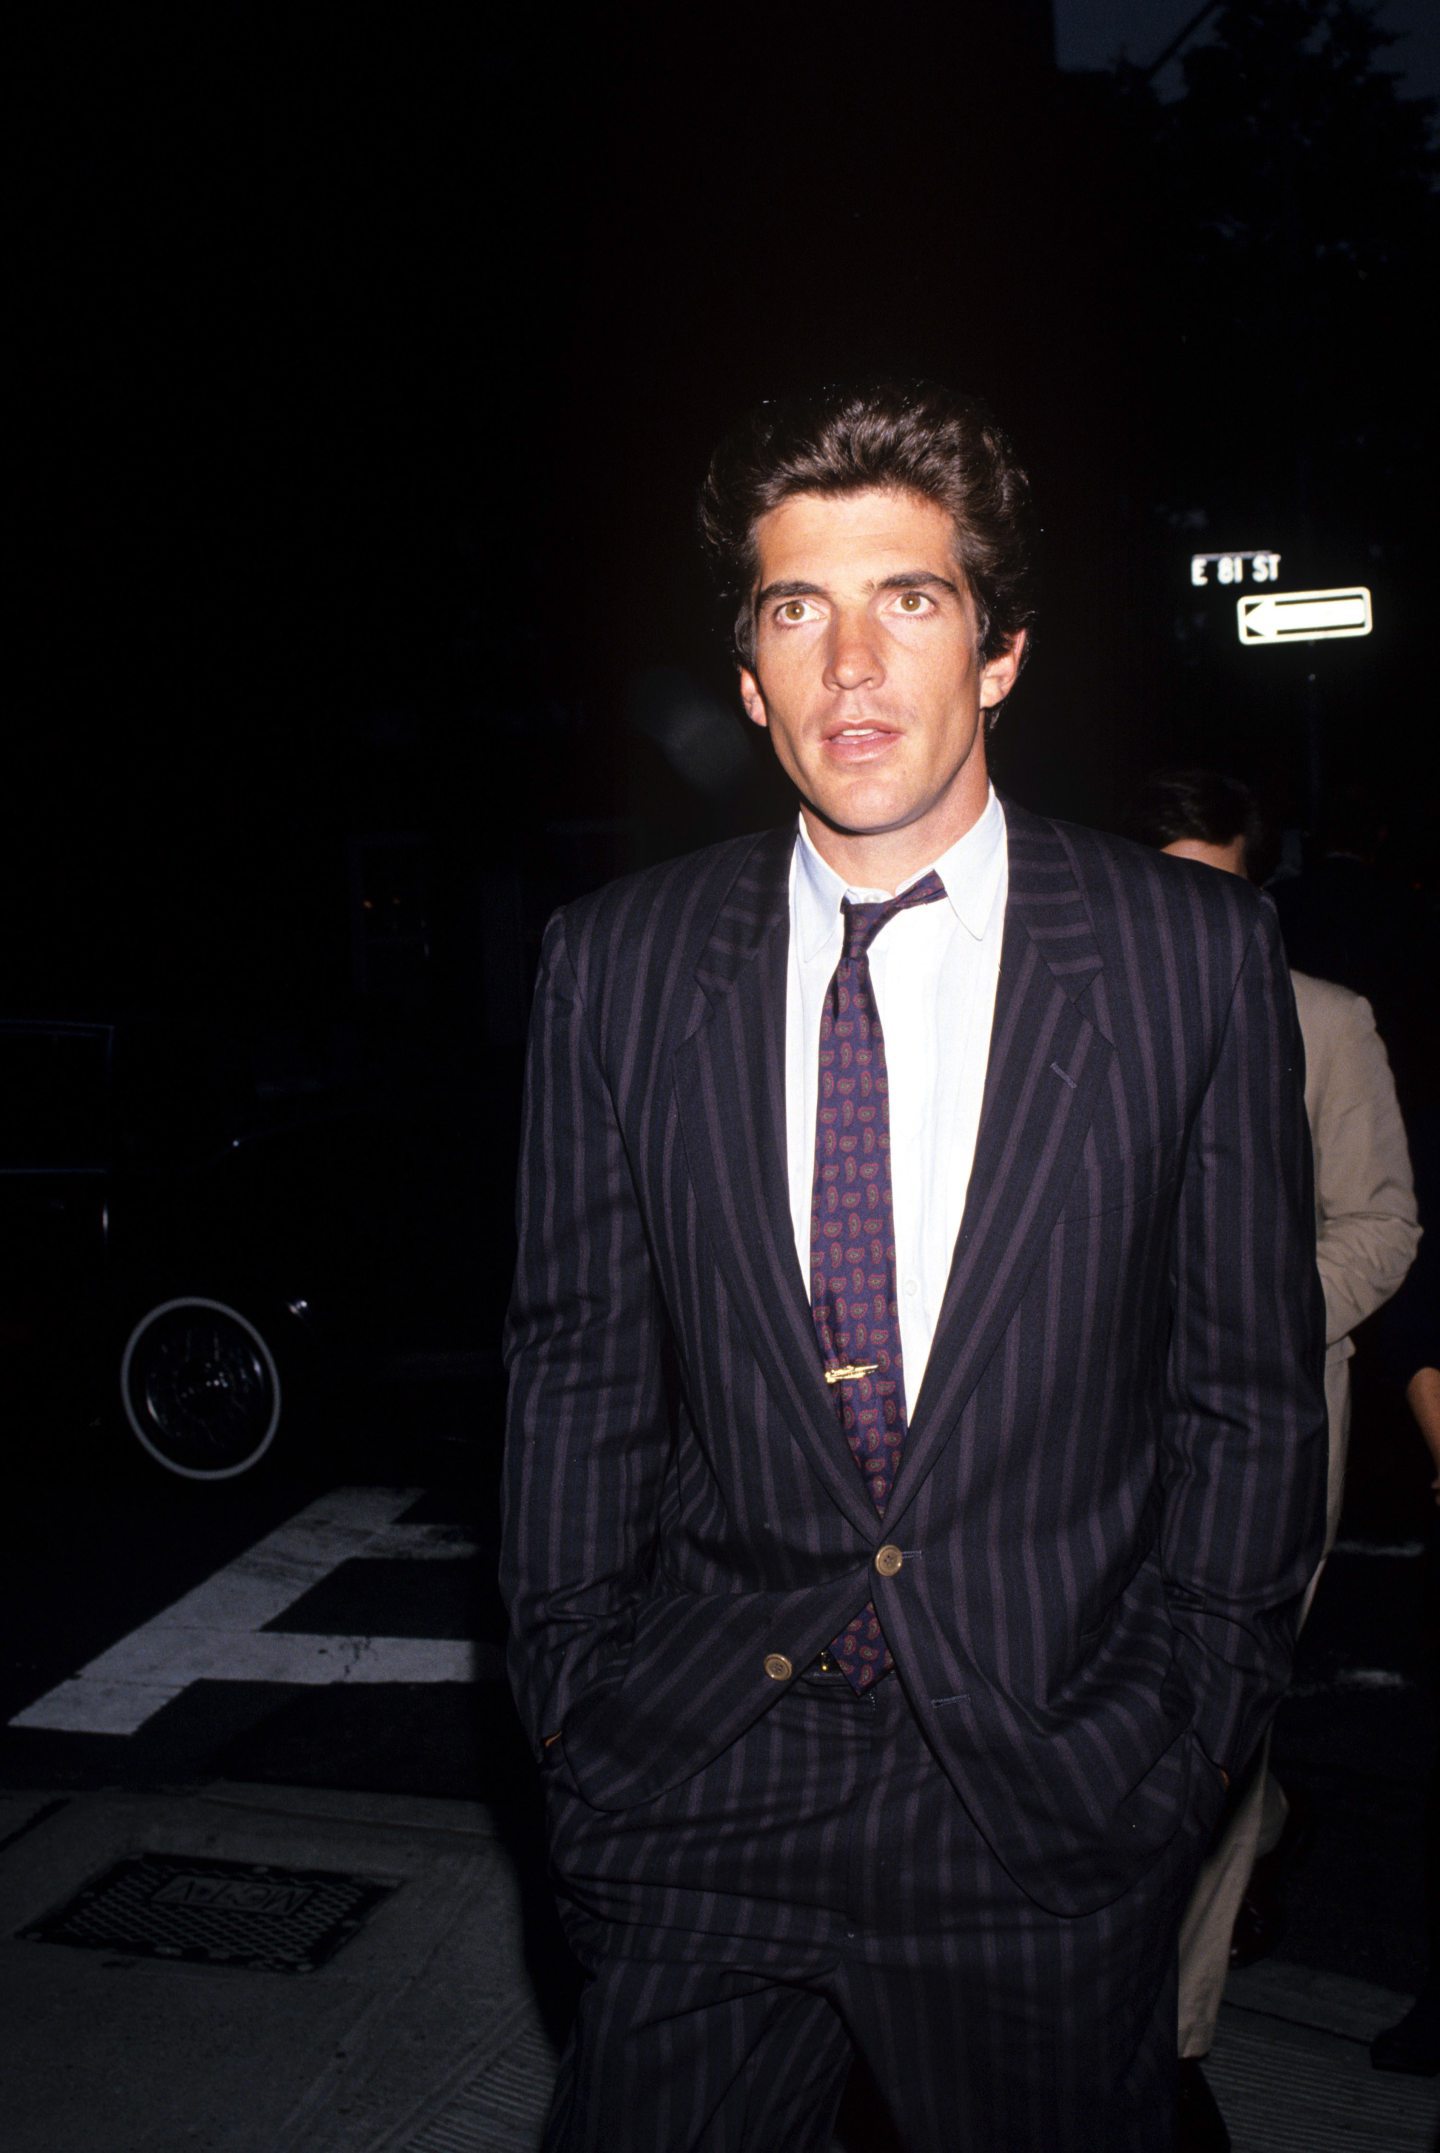 JFK Jr, who died at the age of 38 in a tragic plane crash in 1999. Image: Shutterstock.